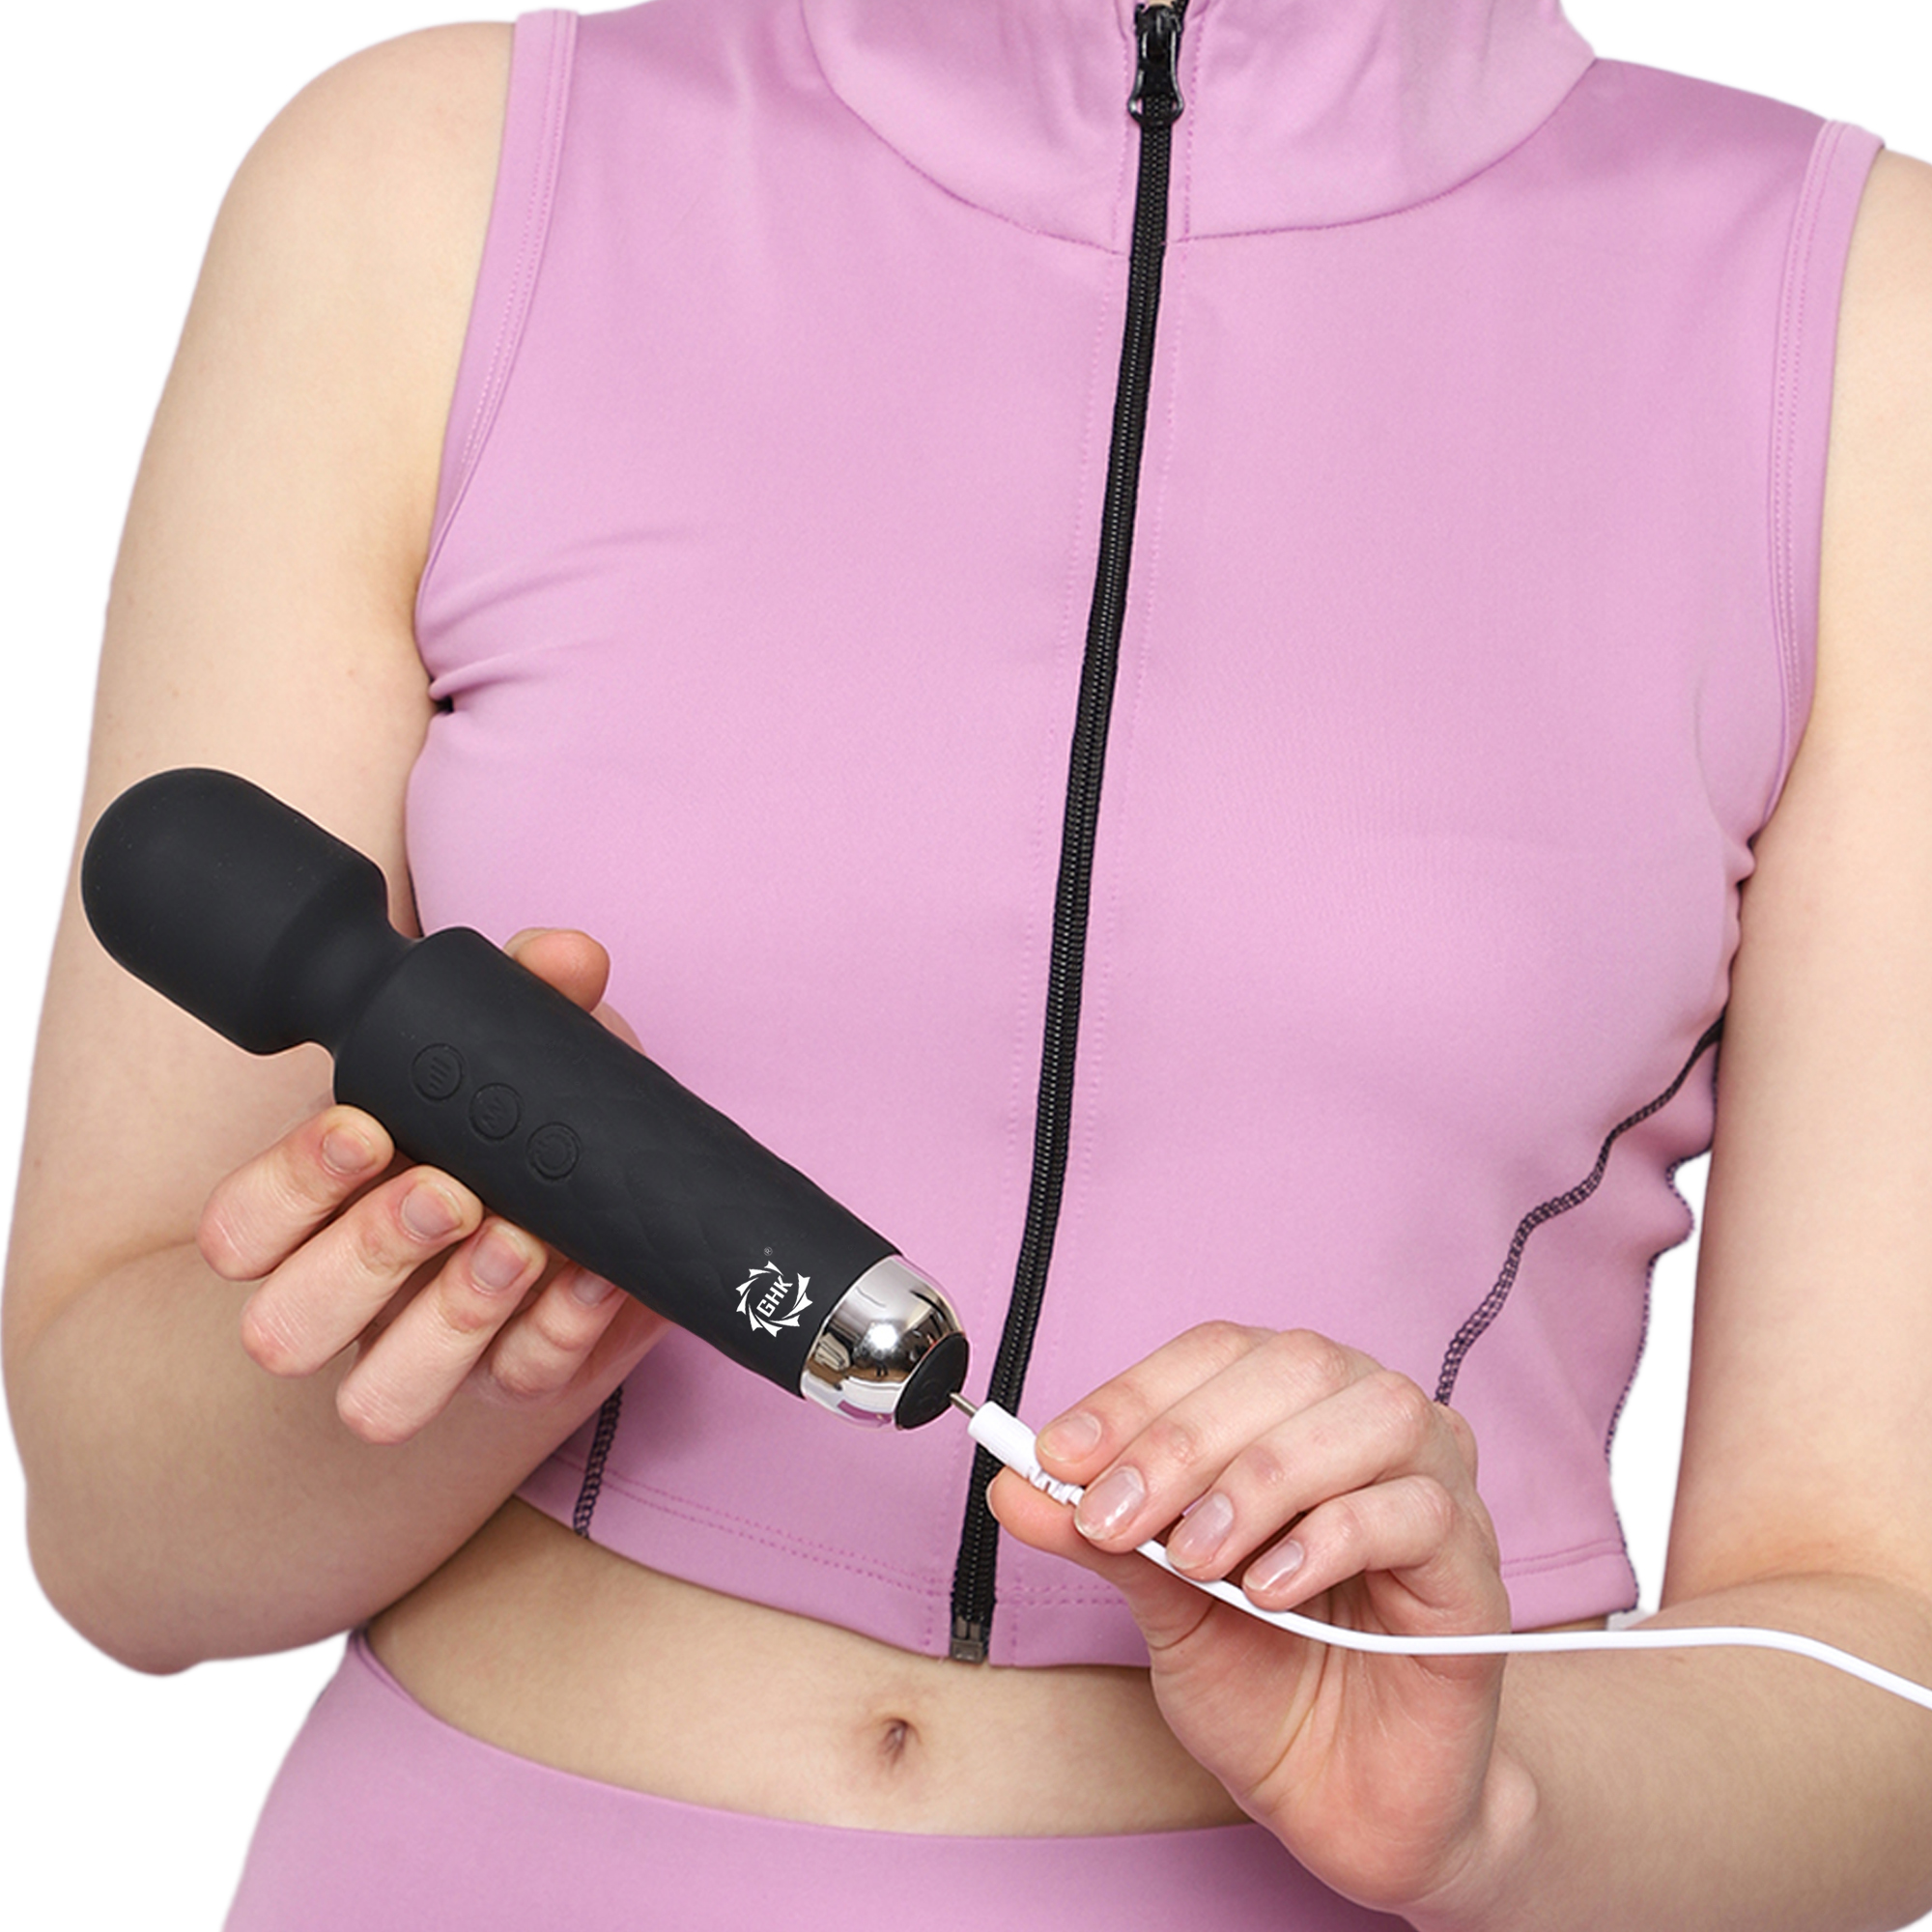 GHK H97 Wireless Vibrating Massager Wand Flexible Head for Targeted Muscle Relaxation, Multicolor